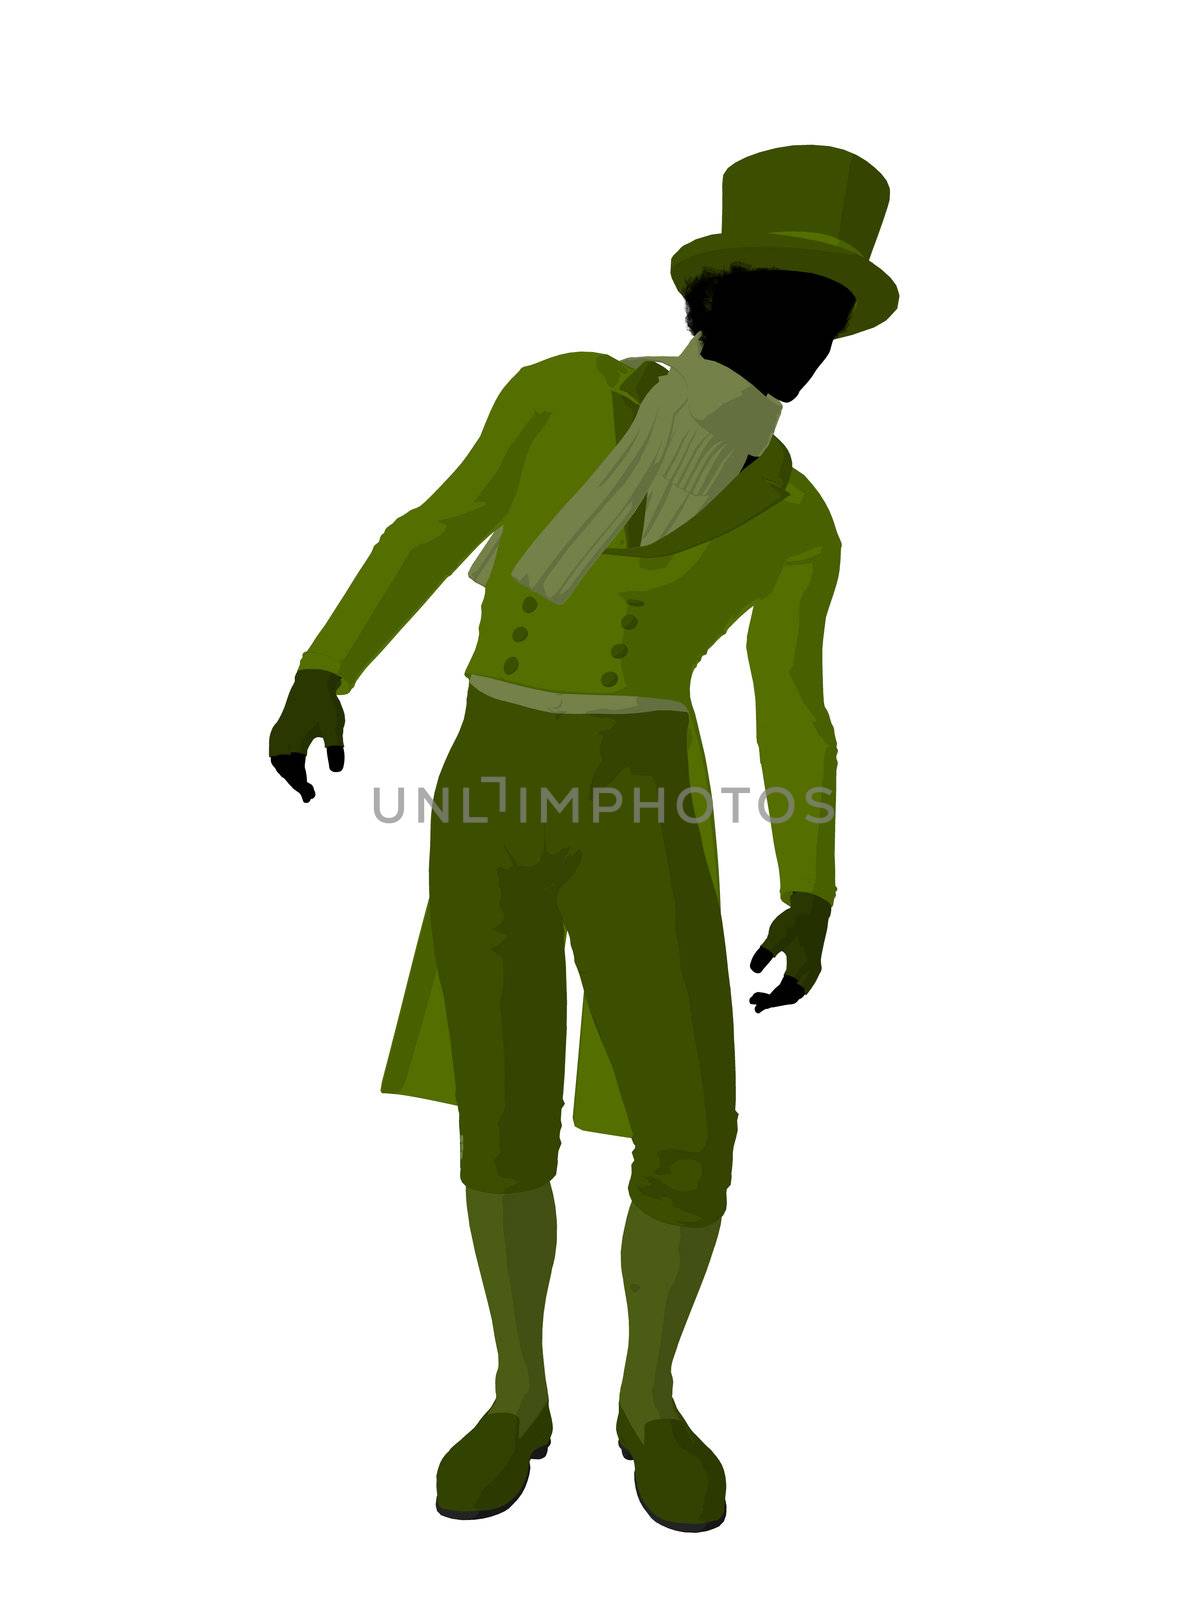 African American Victorian Man Illustration Silhouette by kathygold